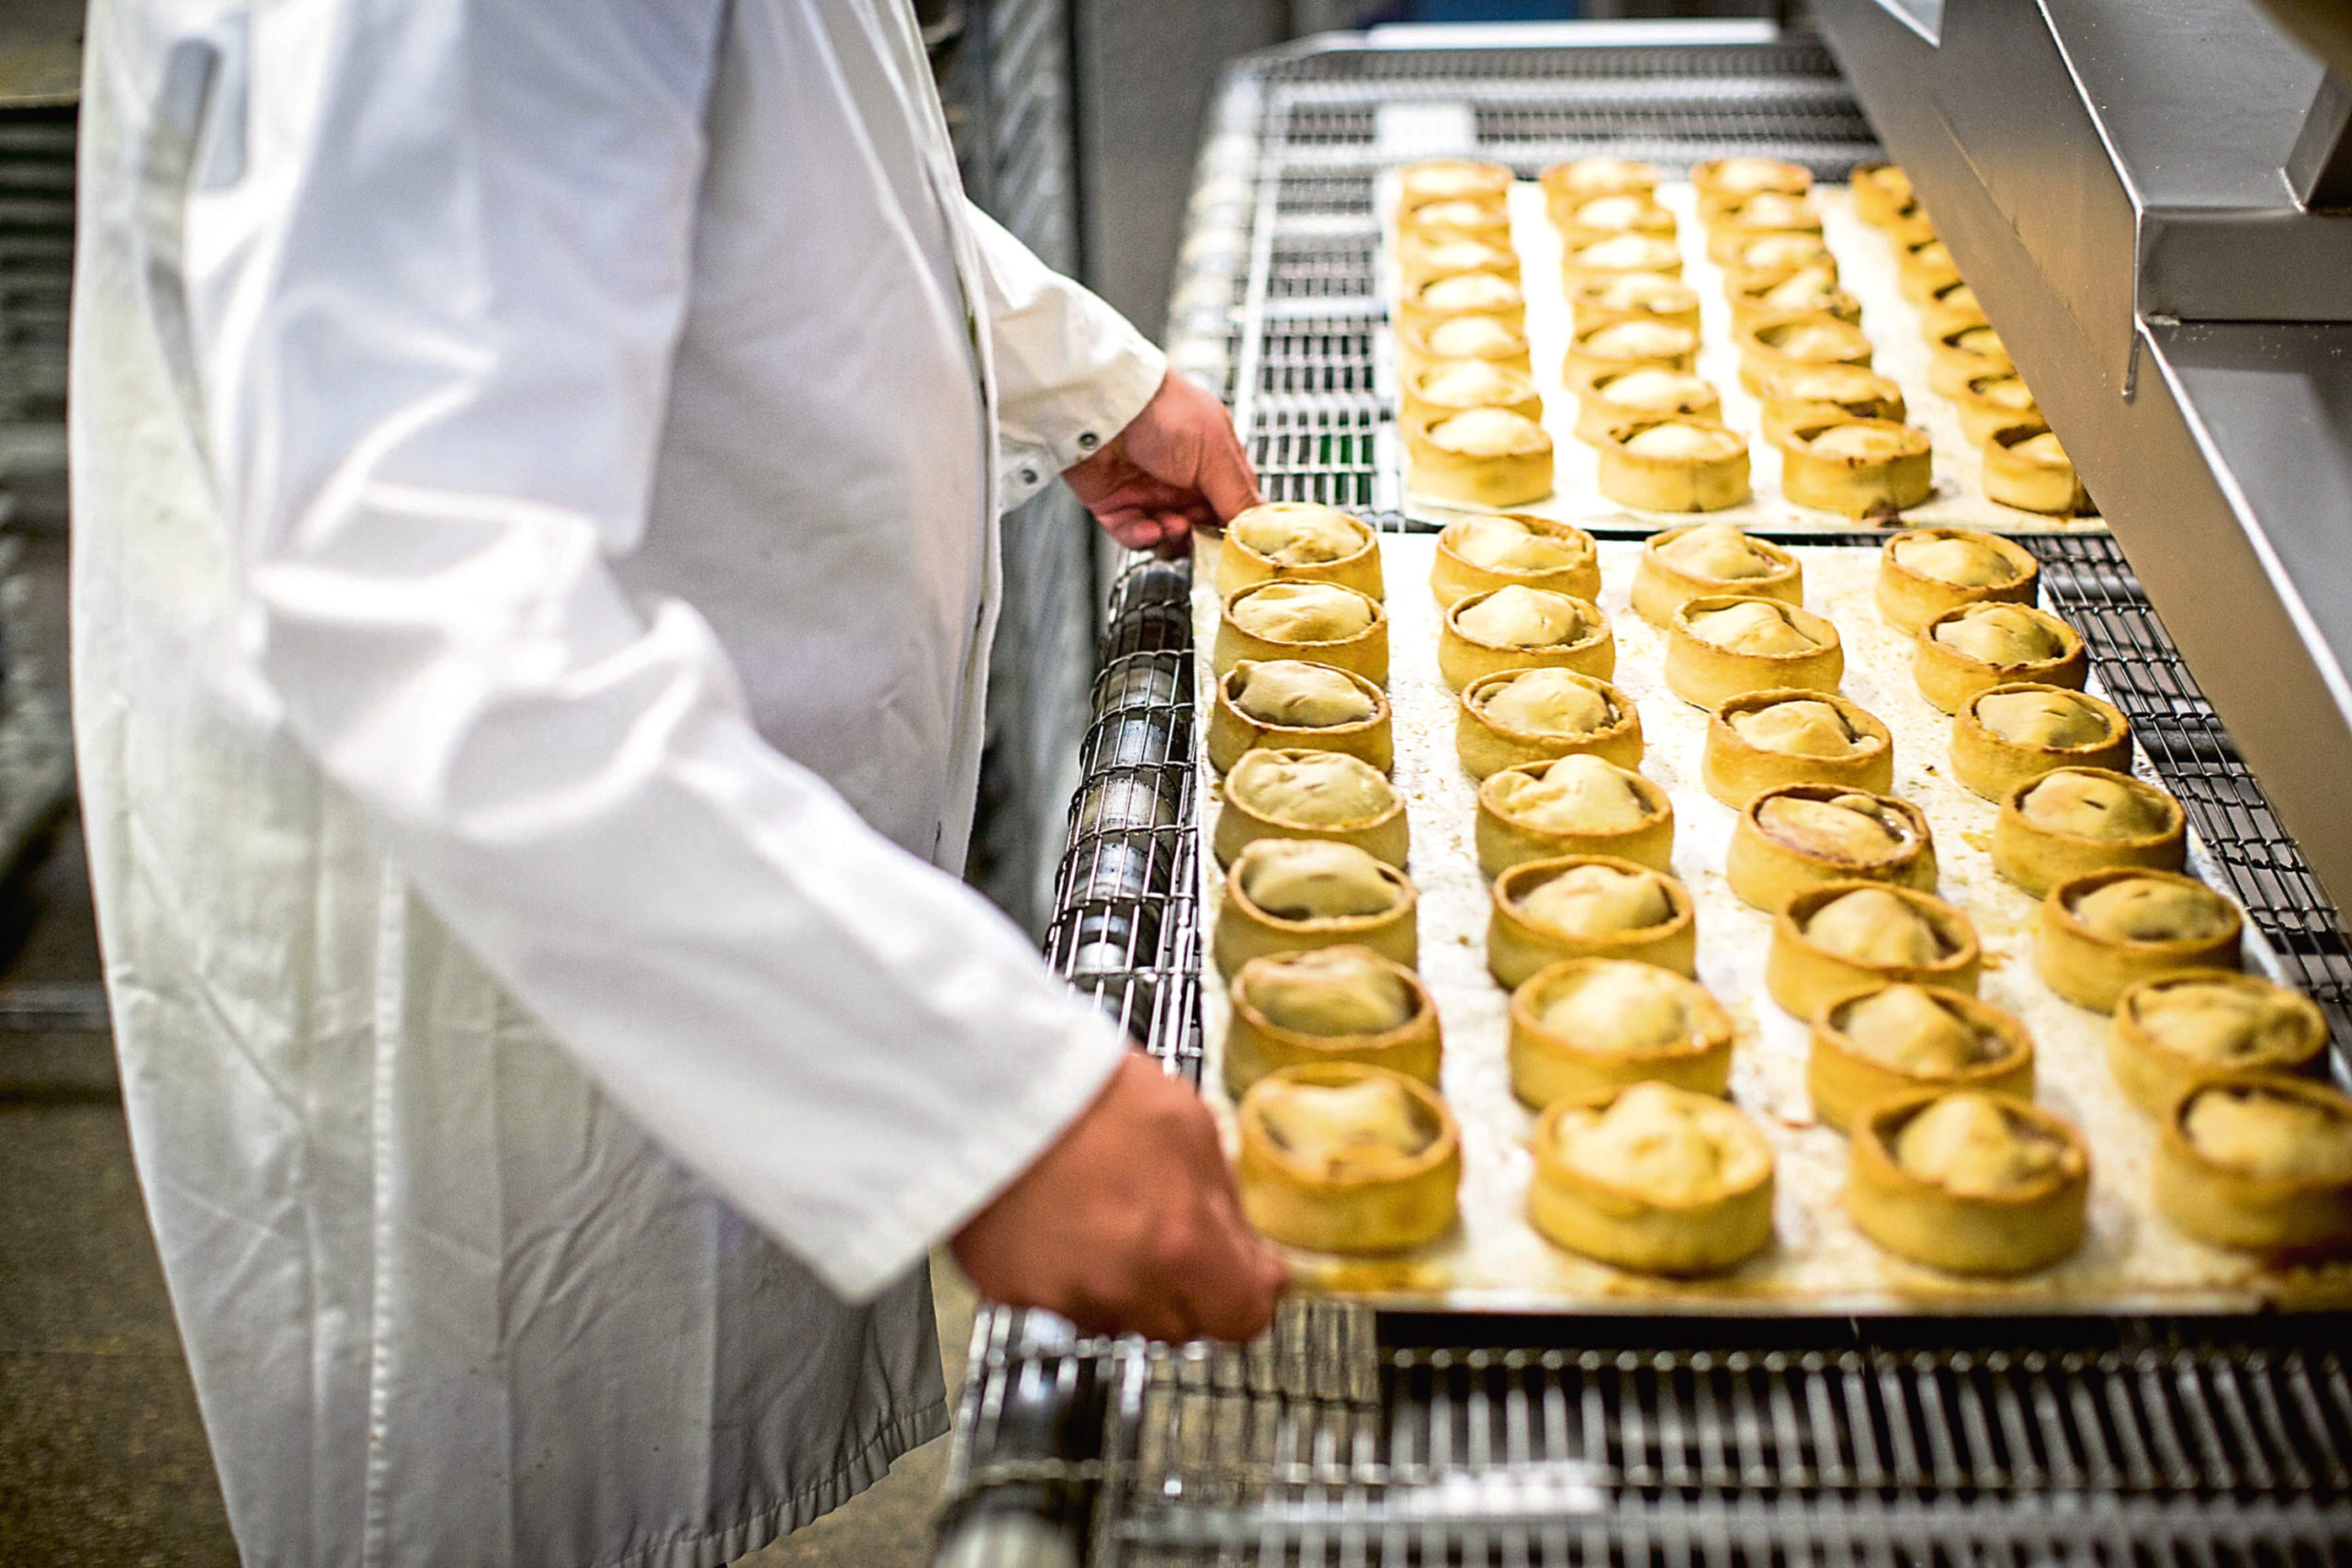 Pies being prepared at Strathmore Foods.